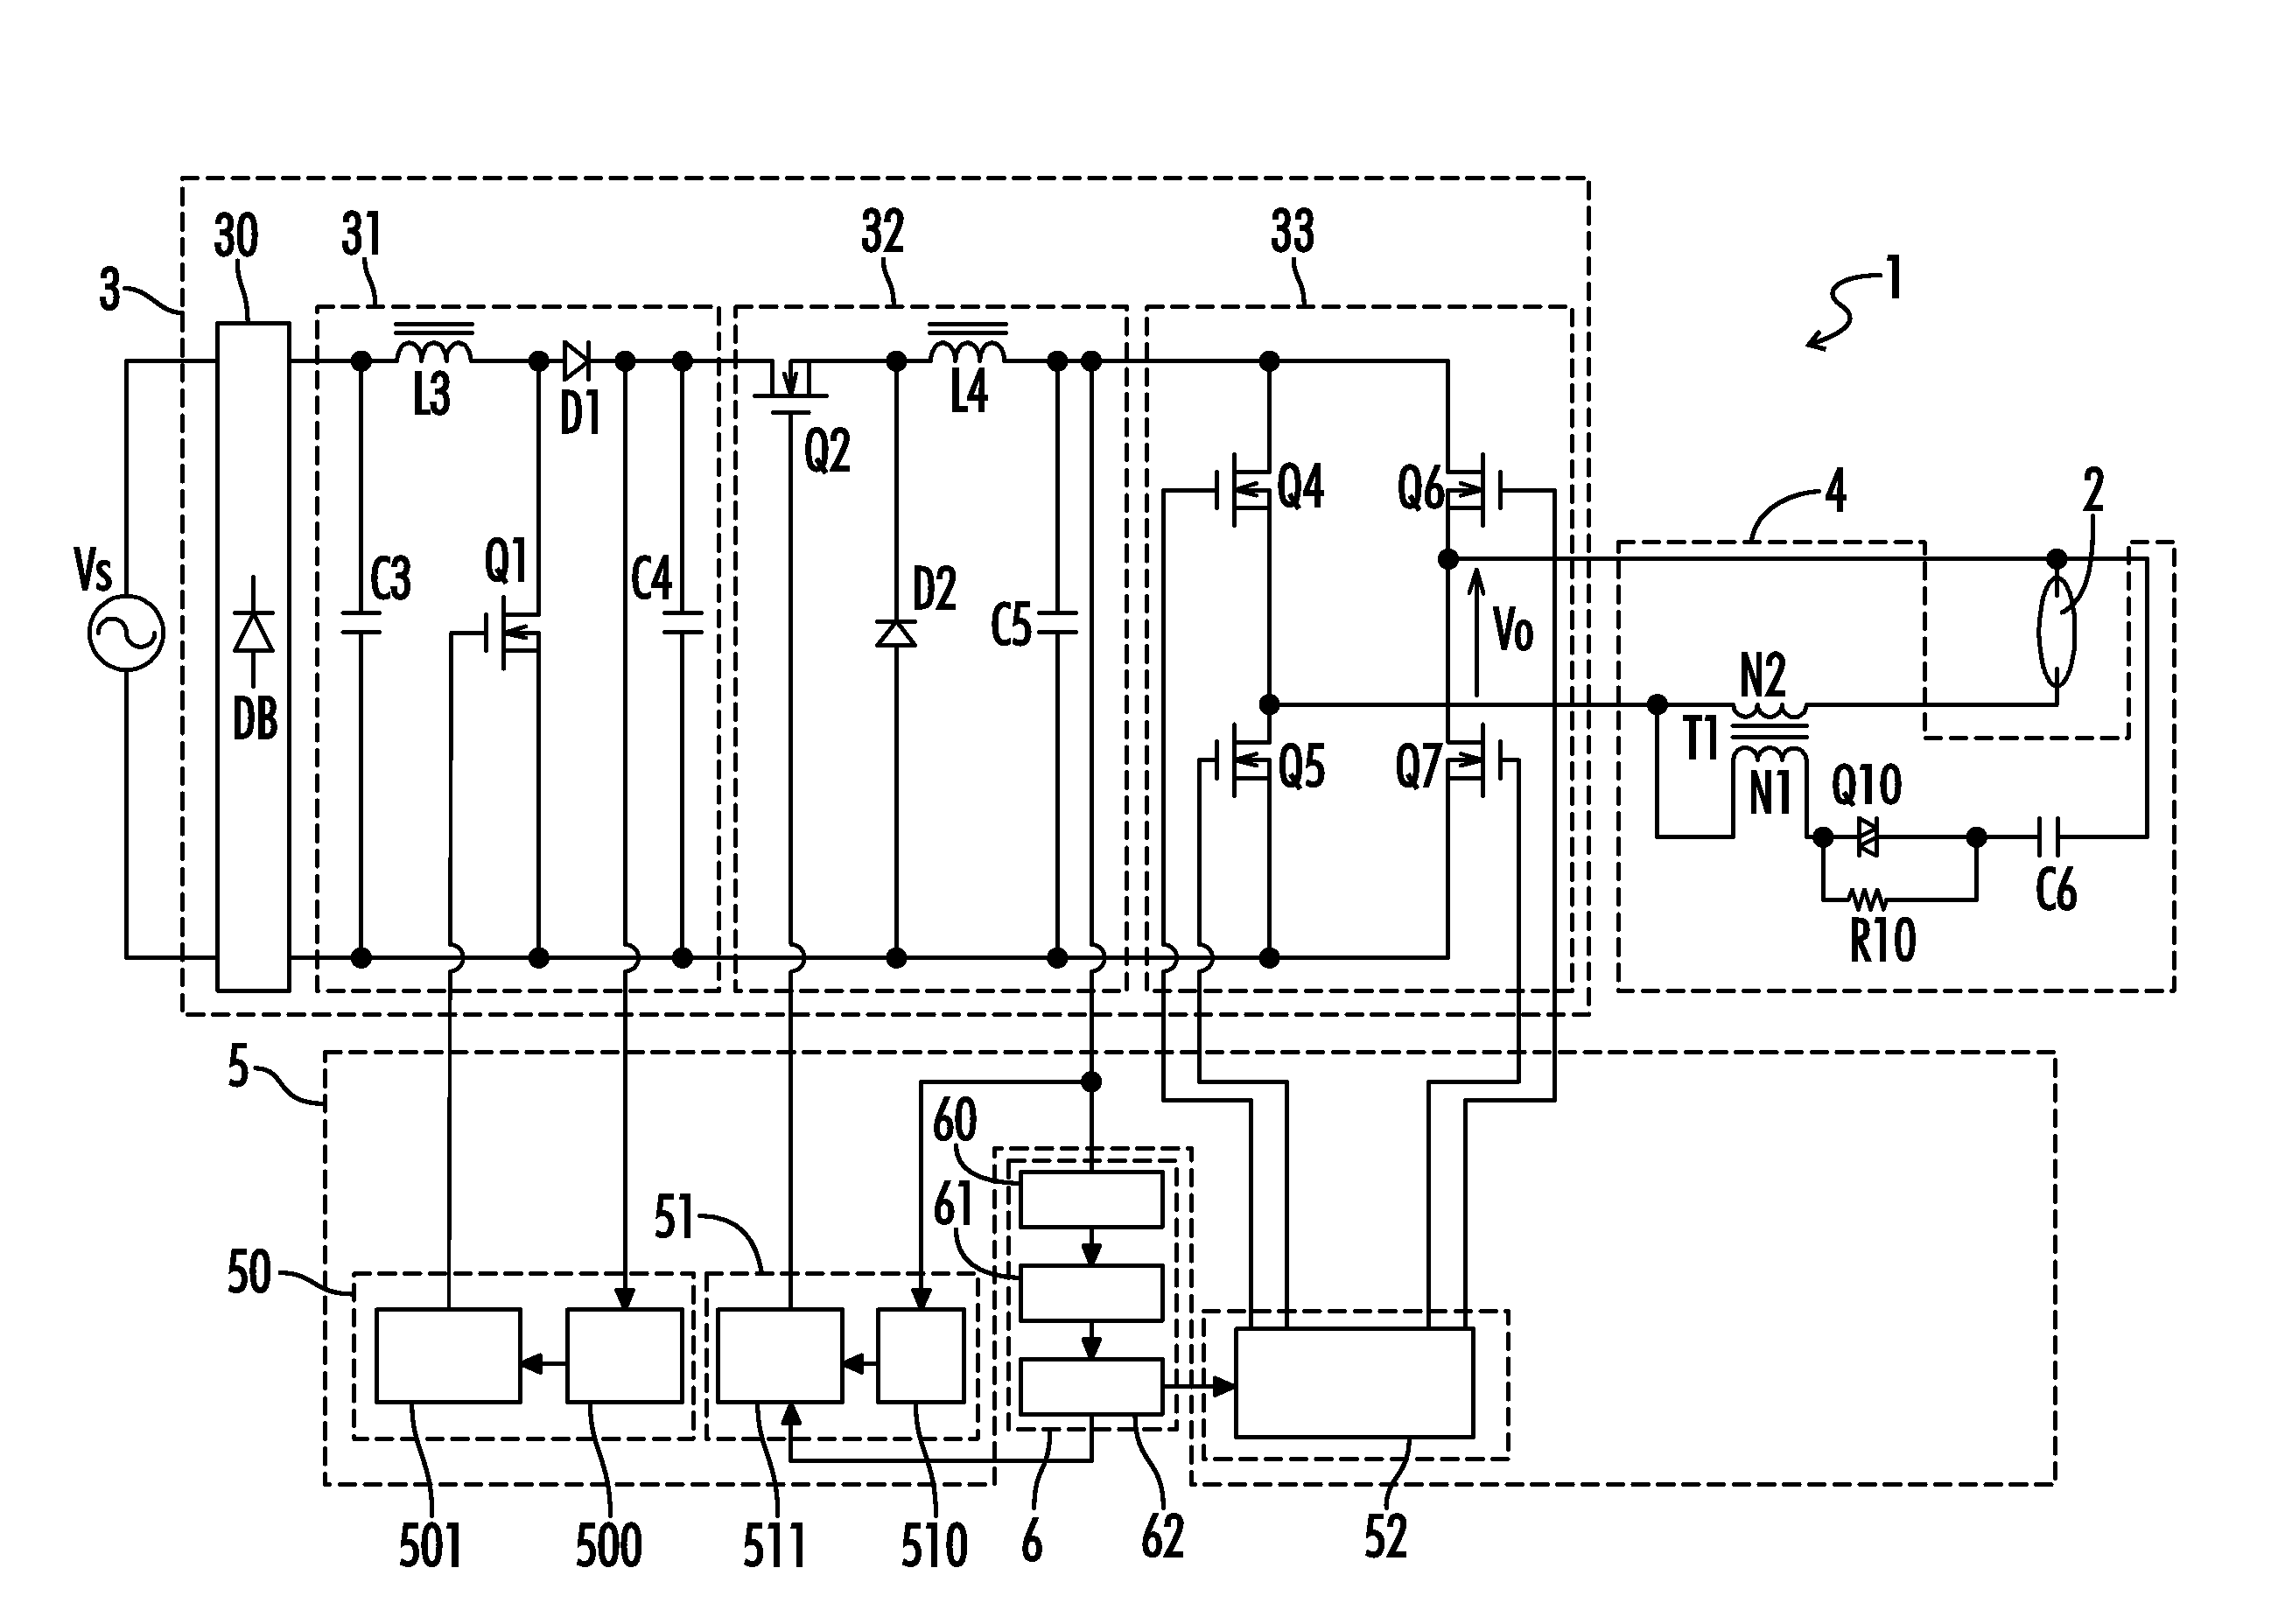 Electronic ballast for restarting high-pressure discharge lamps in various states of operation